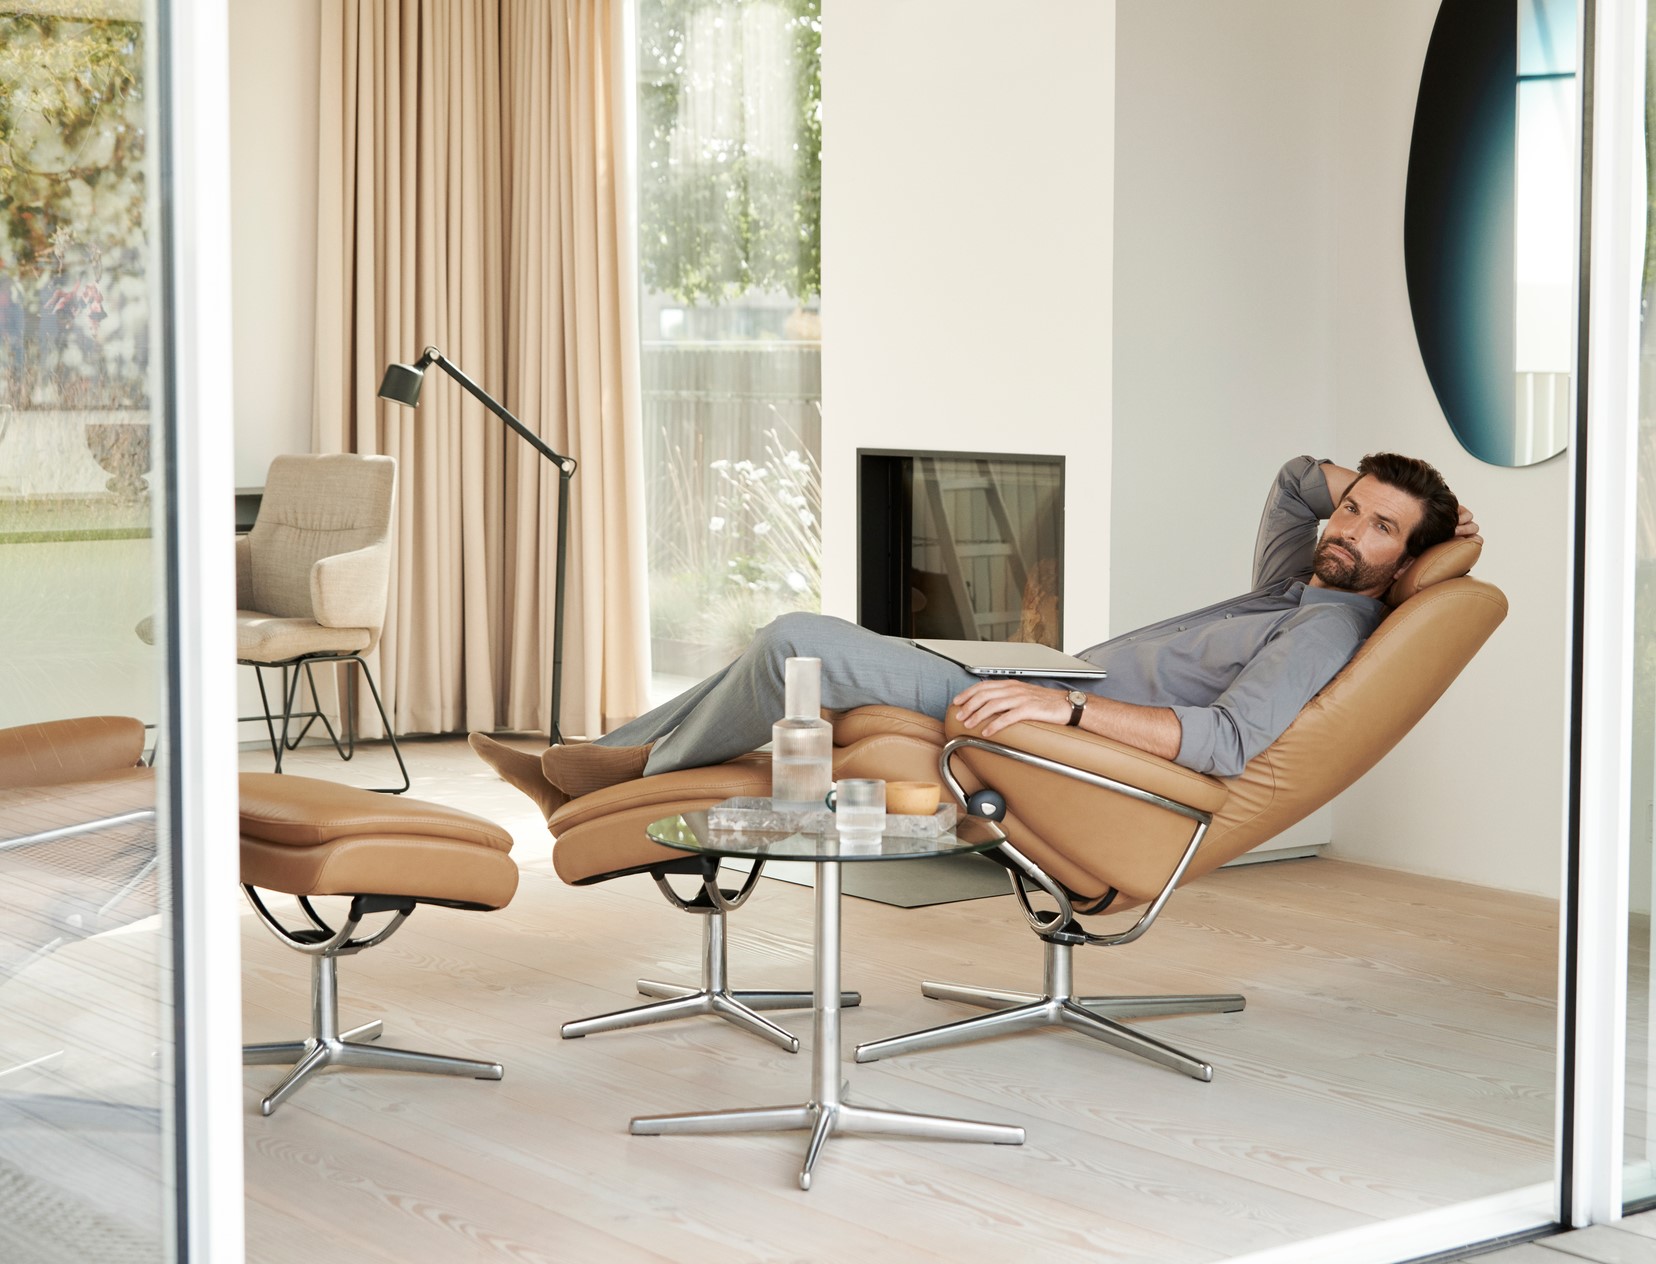 Choosing a Mid-Century Modern Recliner: Why Stressless is your Best Option